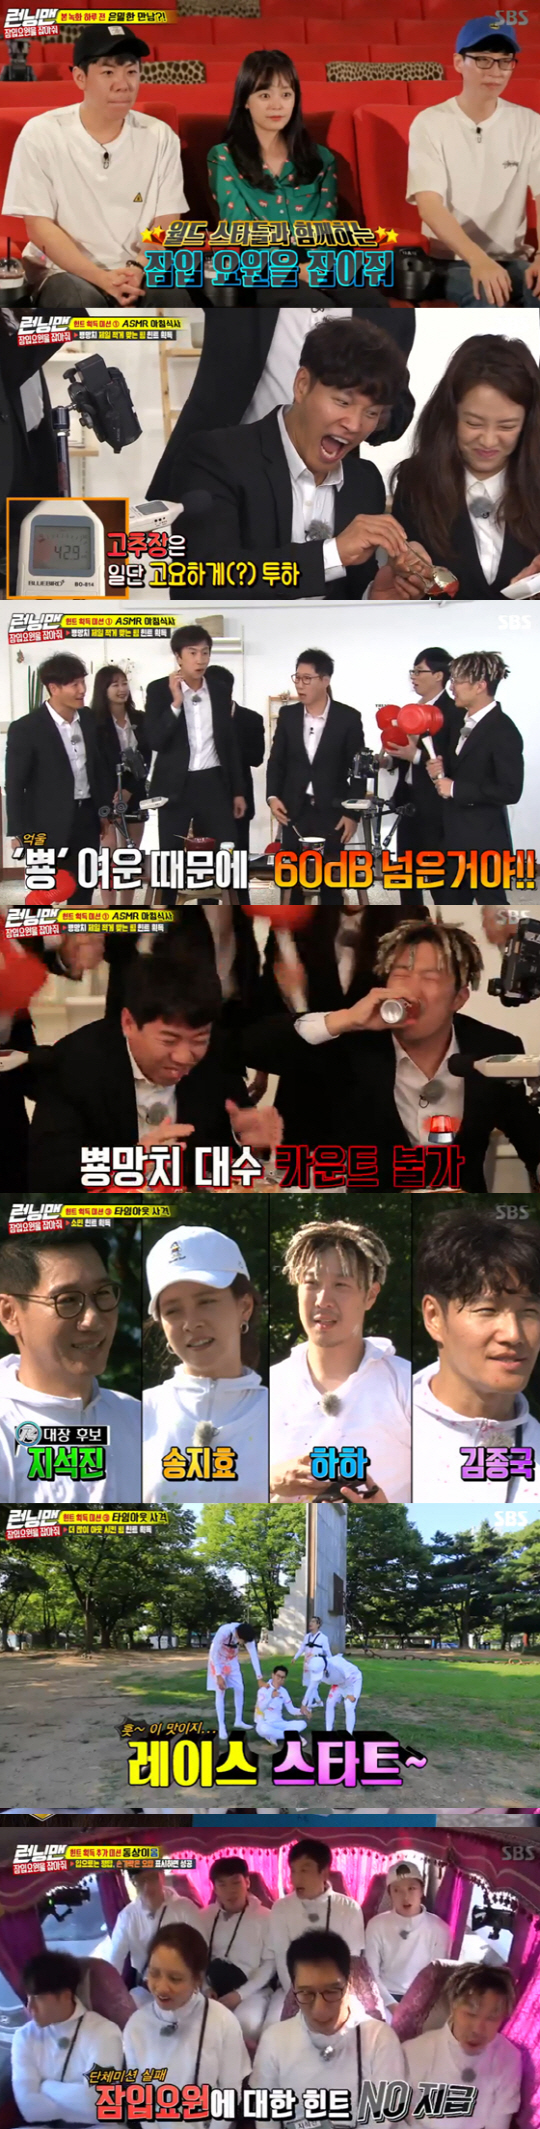 Tom Crew, Henry Carville and Simon Pegg are on the Running Man.On SBS Running Man broadcast on the 22nd, actors Tom Cruise, Henry Carville and Simon Pegg appeared in the movie Mission Impossible 6: Fallout.On this day, Yoo Jae-seok, Yang Se-chan and Jeon So-min had a secret meeting with the production team before the recording day.Three people were spies of the M agency to which Tom Cruise belongs.Yoo Jae-seok, Yang Se-chan, and Jeon So-min should find out the captain of R agency while hiding their identity.Hint acquisition The first round mission is ASMR breakfast. Mission to eat without exceeding 60dB.Kim Jong Kook and Song Ji Hyo were the top performers, and Song Ji Hyo got a hint that Infiltrator A is over 40.The second round group mission was a three-second single, and if eight people completed a sentence, the mission was successful. However, the statue failed to pay the hints.In the third round timeout shooting mission, Jeon So-min got a hint about Captain R. R. Ji Seok-jin, Song Ji-hyo, Haha, and Kim Jong-guk.The final mission is that if three senior agents win the showdown, the infiltrators will get a hint of R captain. On the contrary, if the senior officer loses, the hints of the infiltrators will be paid to the R agents.And finally Tom Cruise, Henry Carville, and Simon Pegg appeared.Tom Cruise said, It is a good show, and I am so glad to be on this show. It is my ninth visit to Korea, and every time I come to Korea, I am so excited and good.Henry Carville said, I am going to visit Korea for the first time. I am so excited and excited. Thank you for inviting me.Simon Pegg said, This is my second visit to Korea. I am enjoying this time too much. I learned to mark hearts.First, Simon Peg and Lee Kwang-soo conducted an iron bag quiz, and Simon Peg showed concentration and hit broccoli.Henry Carville and Tom Cruise also won the game, matching whistles and matches, and Simon Pegg laughed with a special sense of entertainment.Tom Cruise, Henry Carville and Simon Pegg then had a good time together with the box mission and the Tong-Ajeos game.Finally, the three were presented with a signature of Running Man: The Namemark.It was so fun - you guys are great, Tom Cruise said.Thank you, it was so fun playing games, it was also so good to be on these shows, Henry Carville then revealed.Simon Pegg said, It was really fun, he said. I am so happy, but I think its probably because we won a lot.After that, Yoo Jae-seok and Jeon So-min were on the final decision. In particular, the spy agents pointed to Haha as R-captain, but the actual R-captain was Song Ji-hyo.The final victory was won by the R agency.